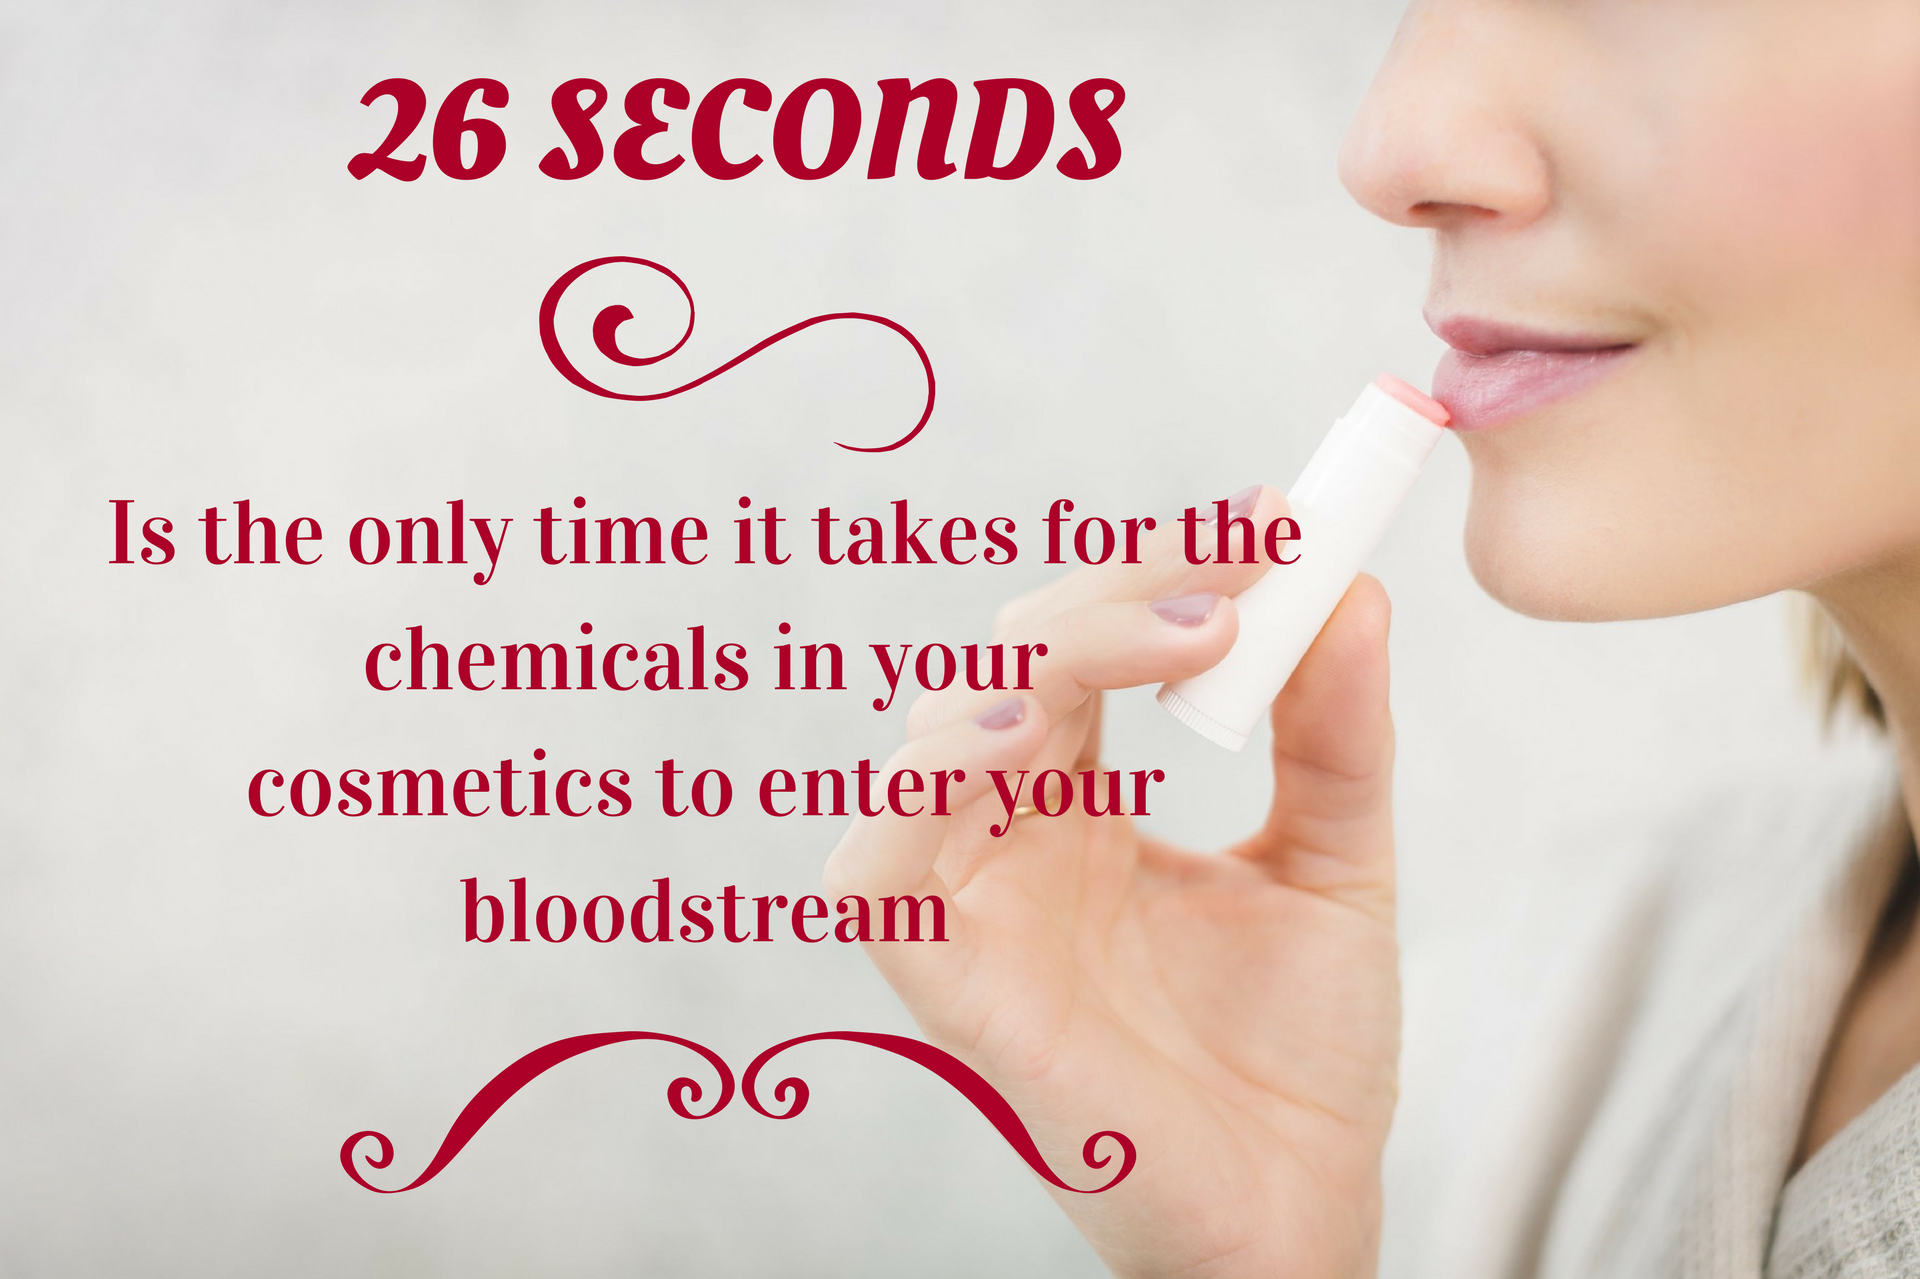 Only 26 seconds for the chemicals in your cosmetics to enter your bloodstream